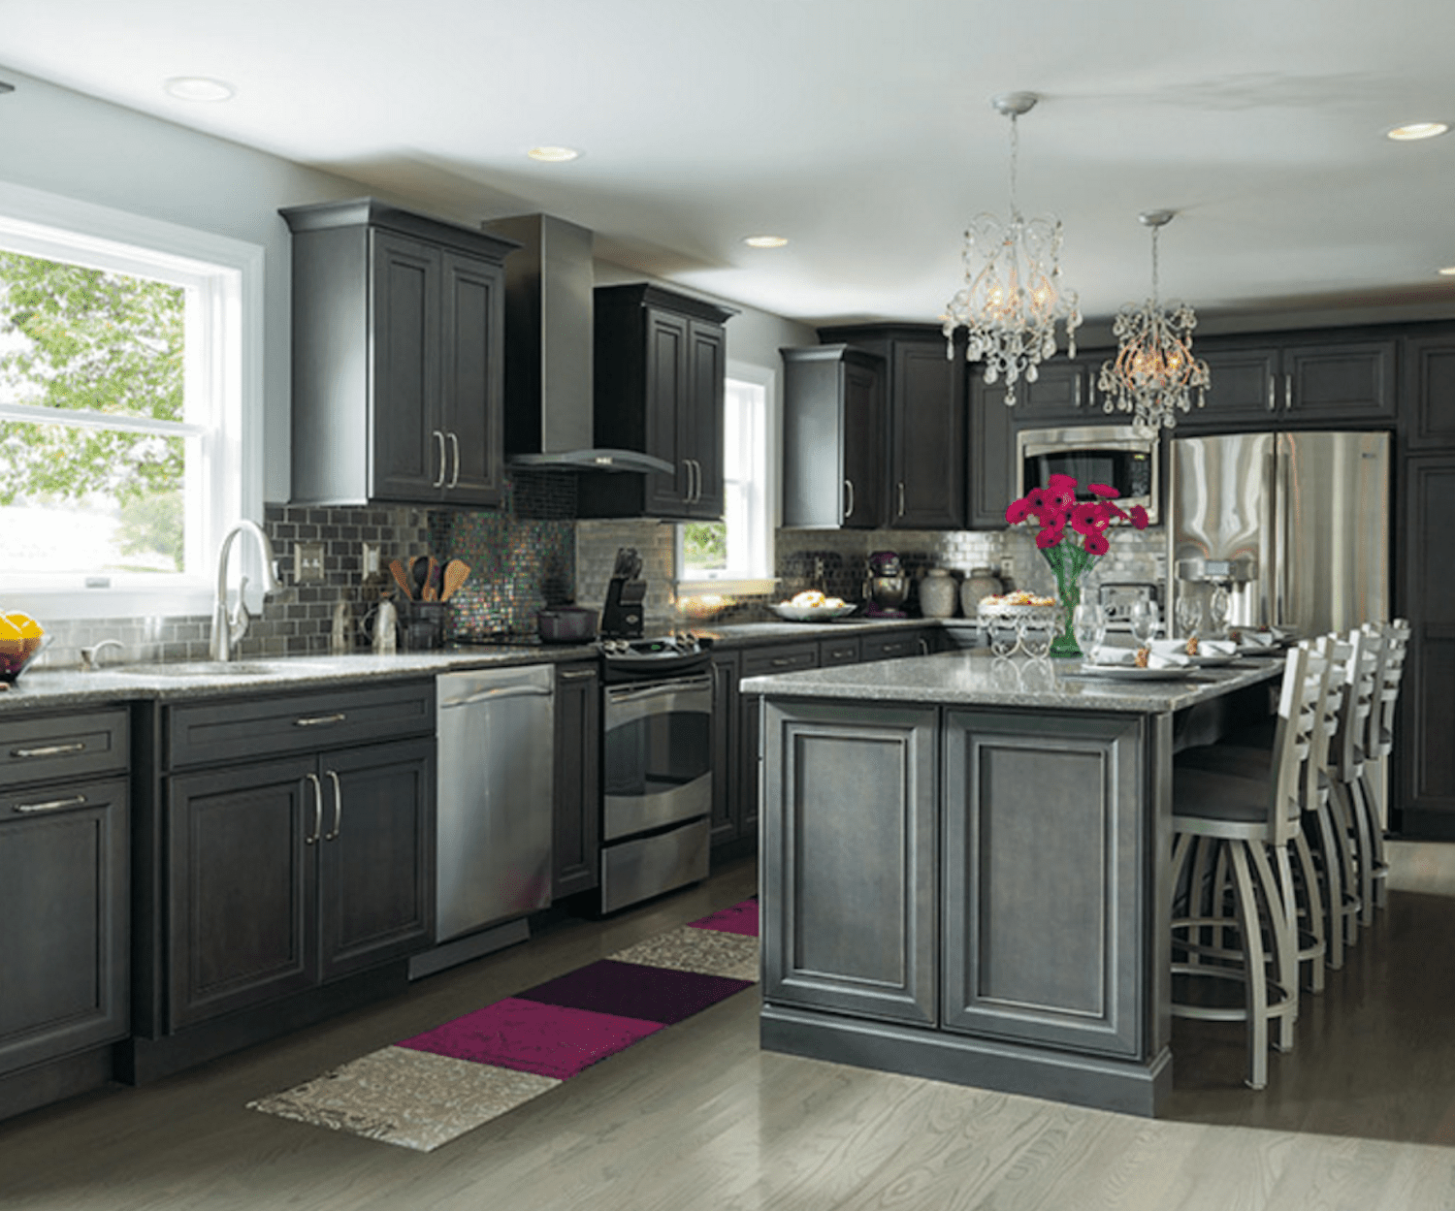 5 Inspiring Gray Kitchen Design Ideas - what color should i paint my kitchen with grey cabinets?